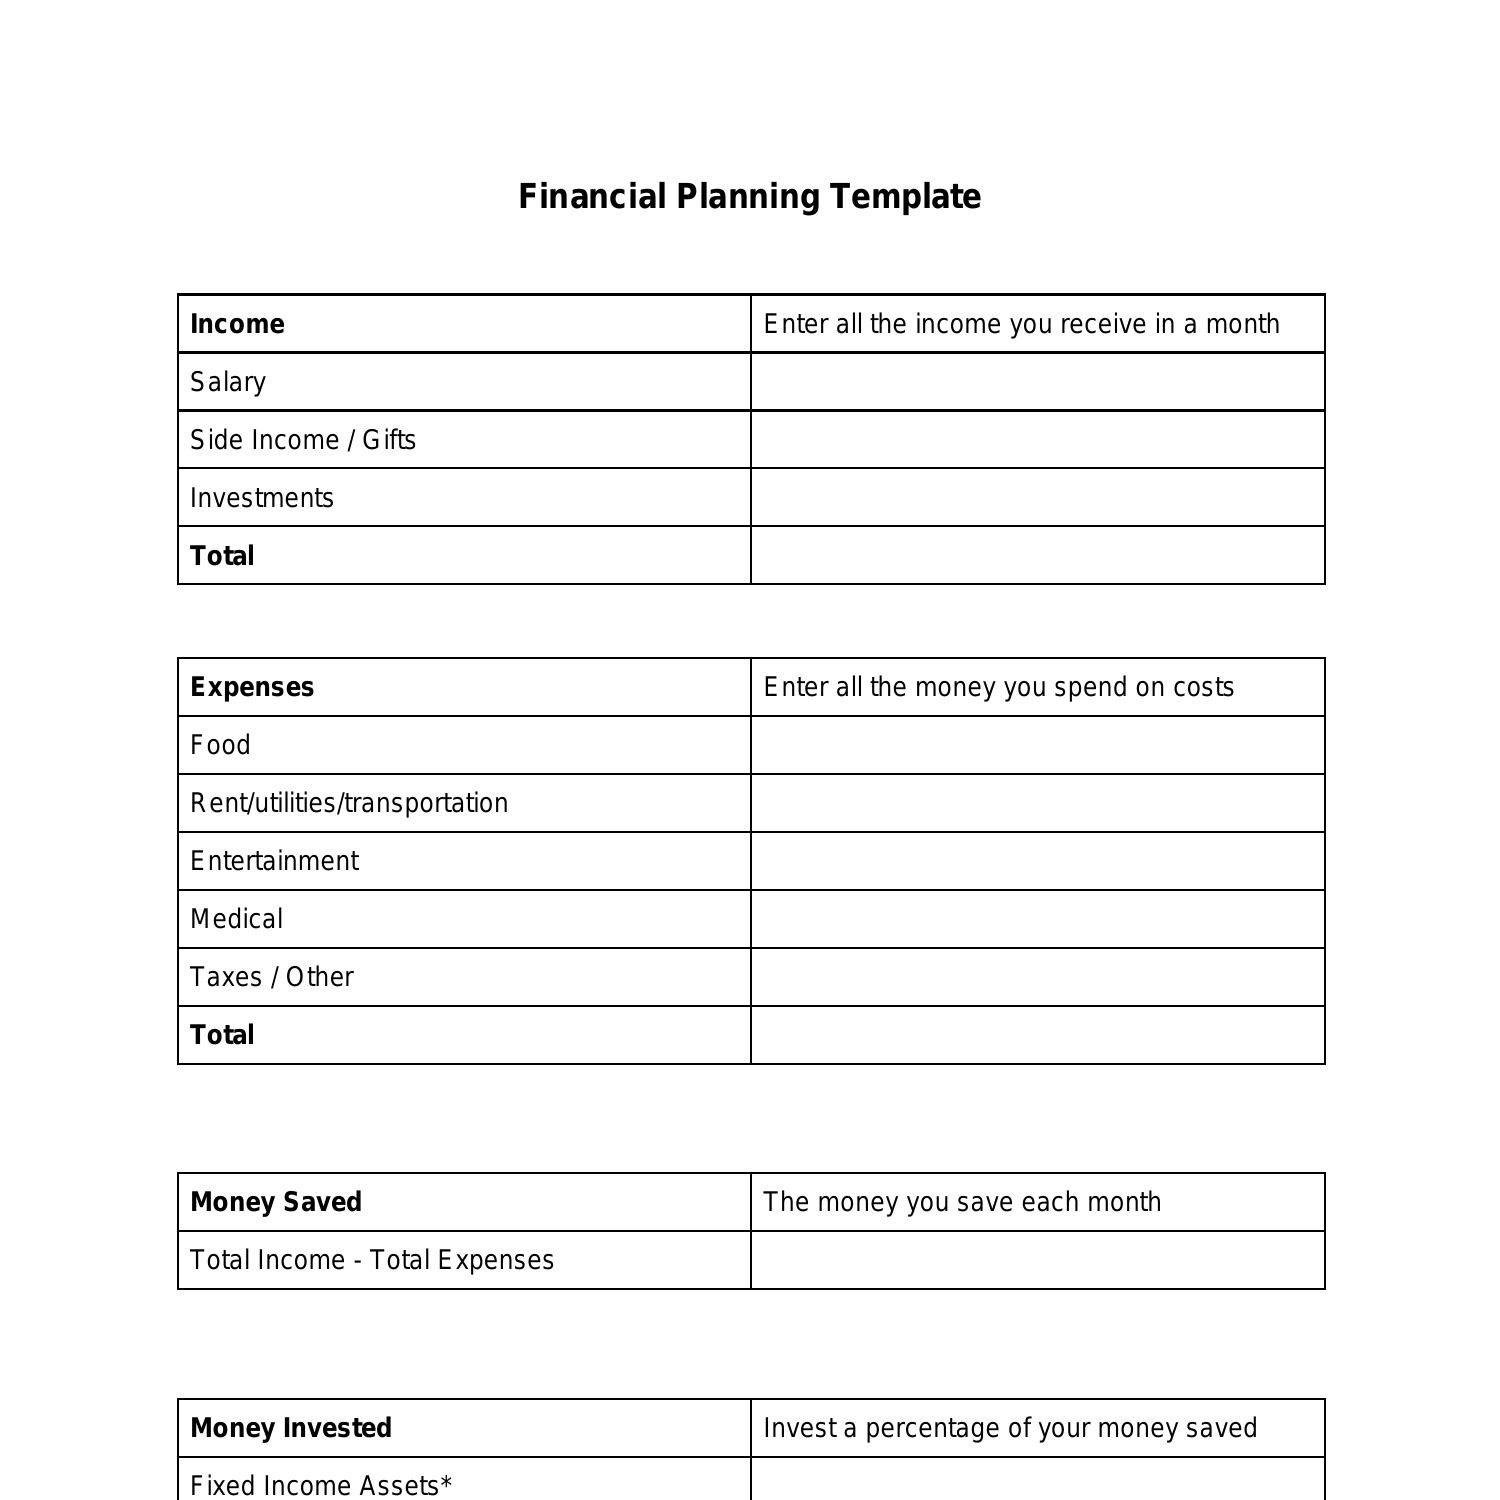 financial-planning-template-docx-docdroid